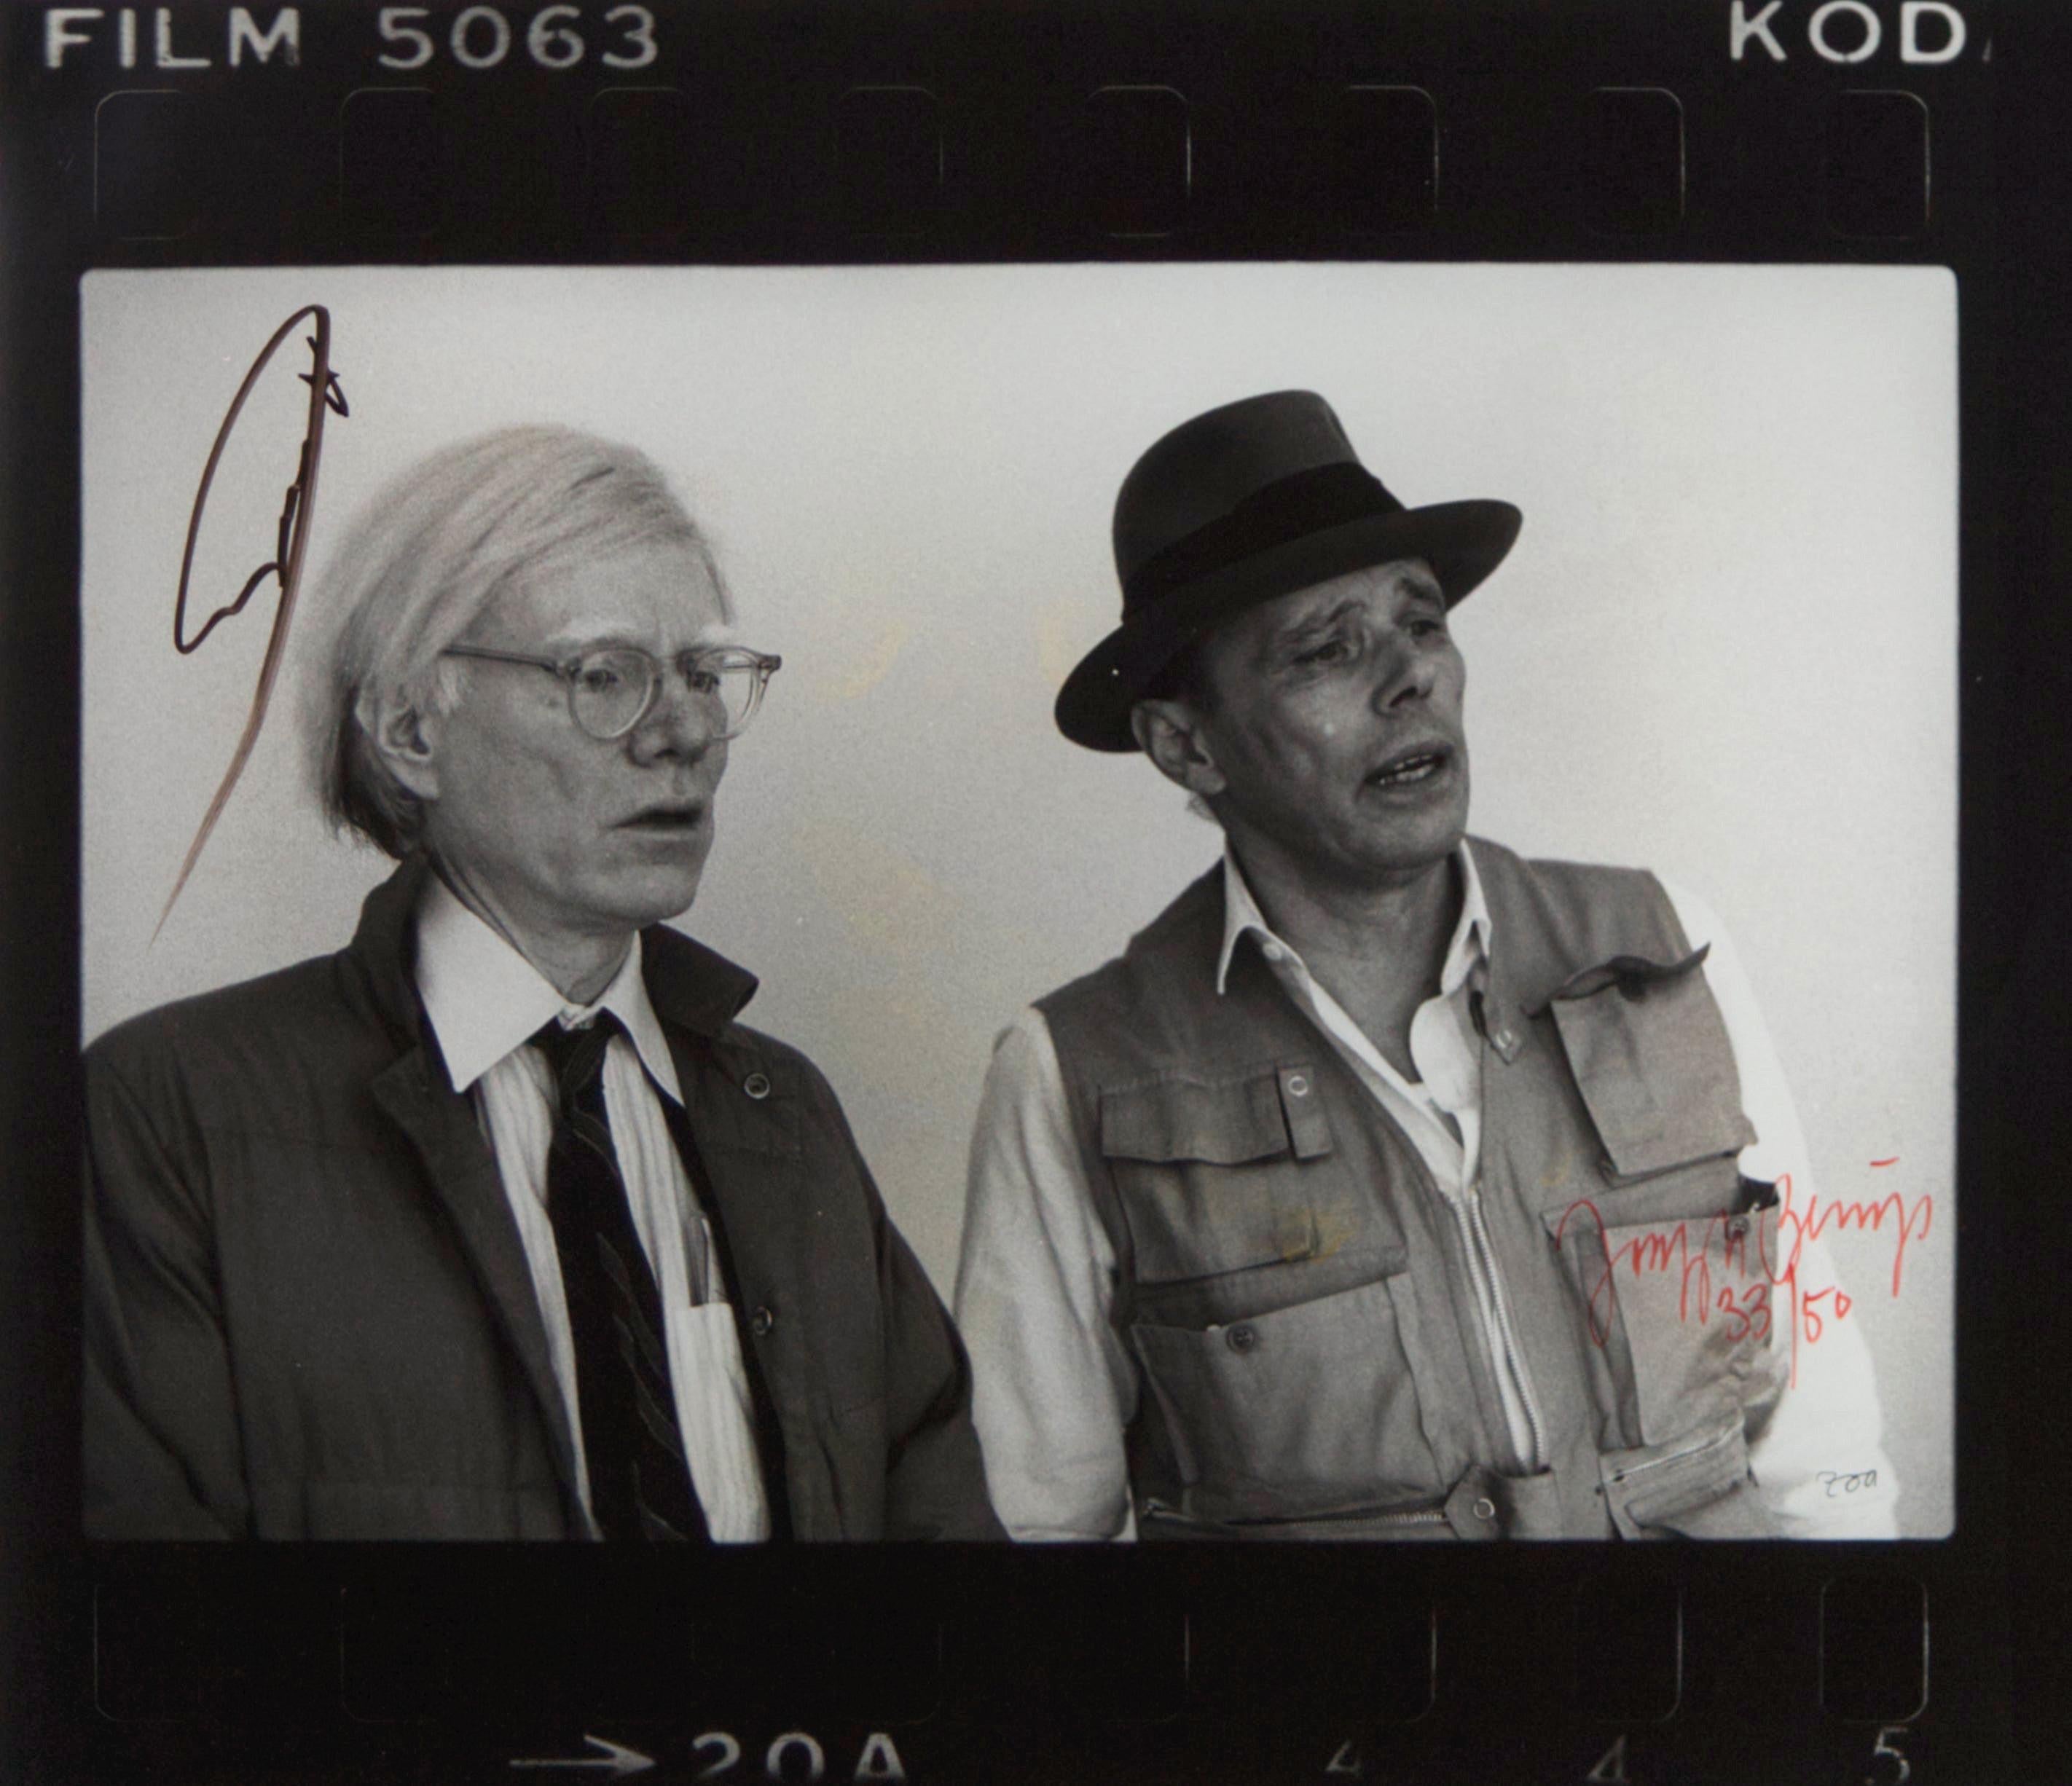 Beuys & Warhol, New York 1979, photography by ZOA, one of nine signed by Warhol - Photograph by Joseph Beuys